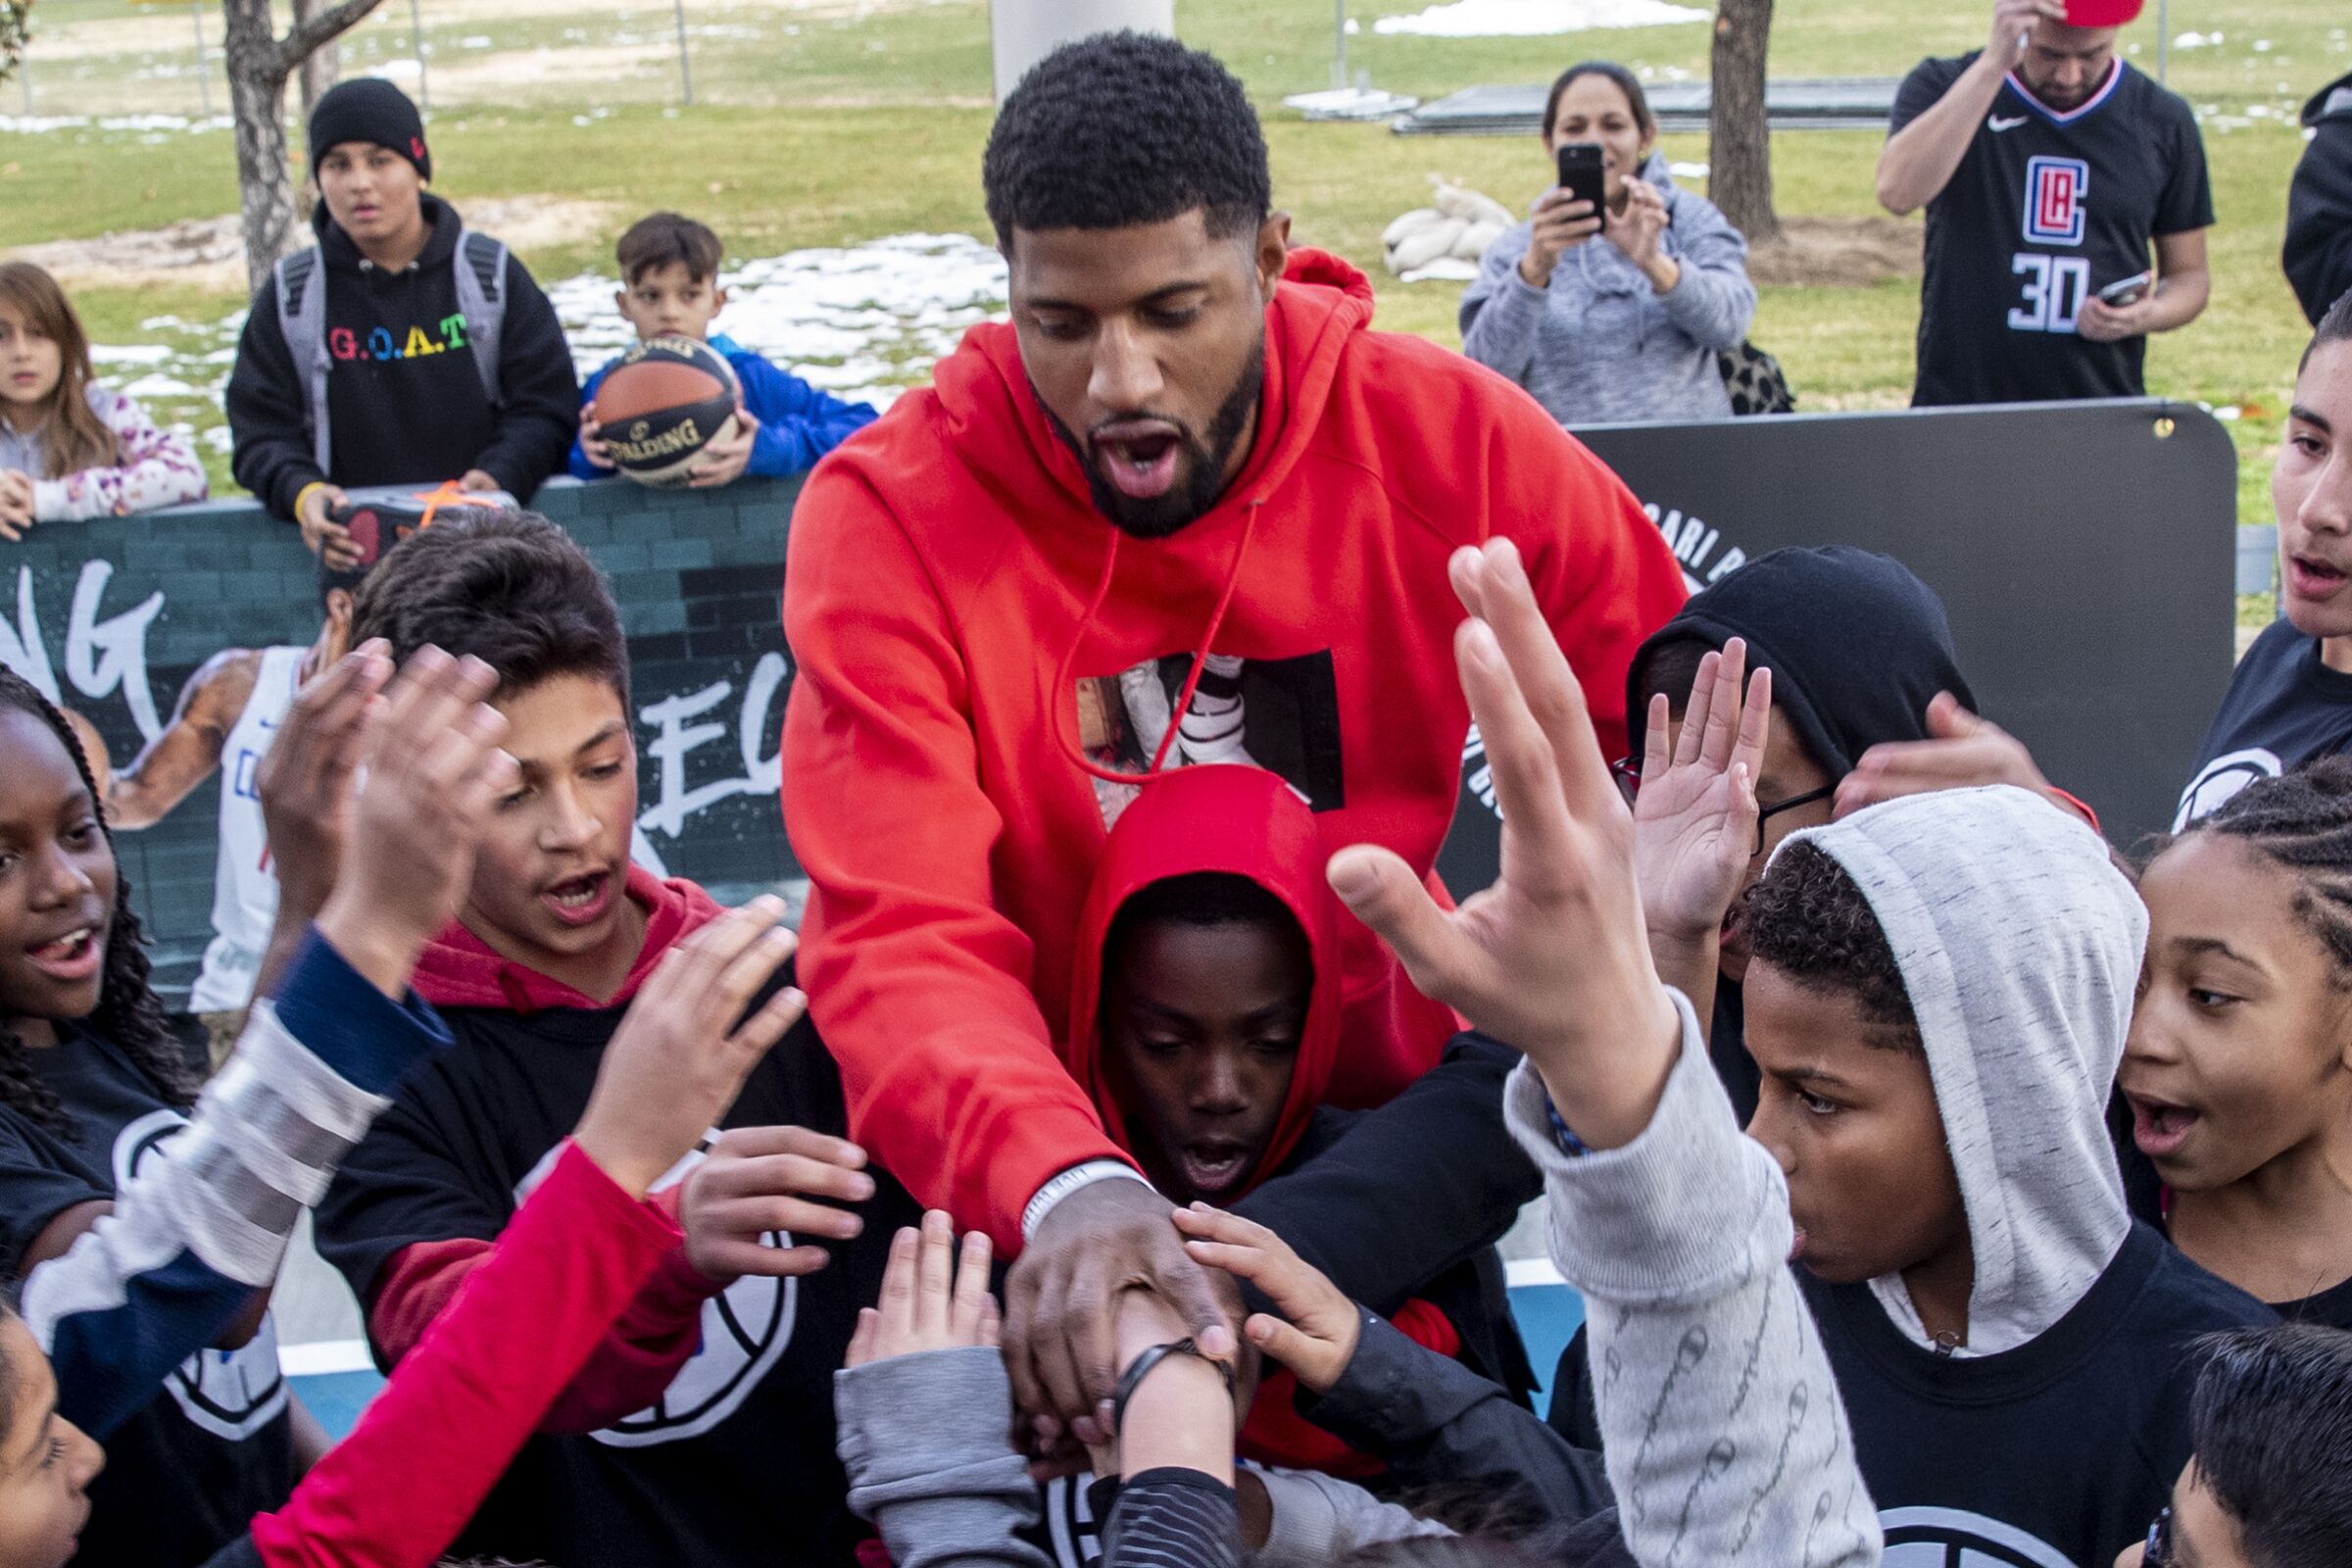 Clippers forward Paul George greets young fans on a basketball court at a park.